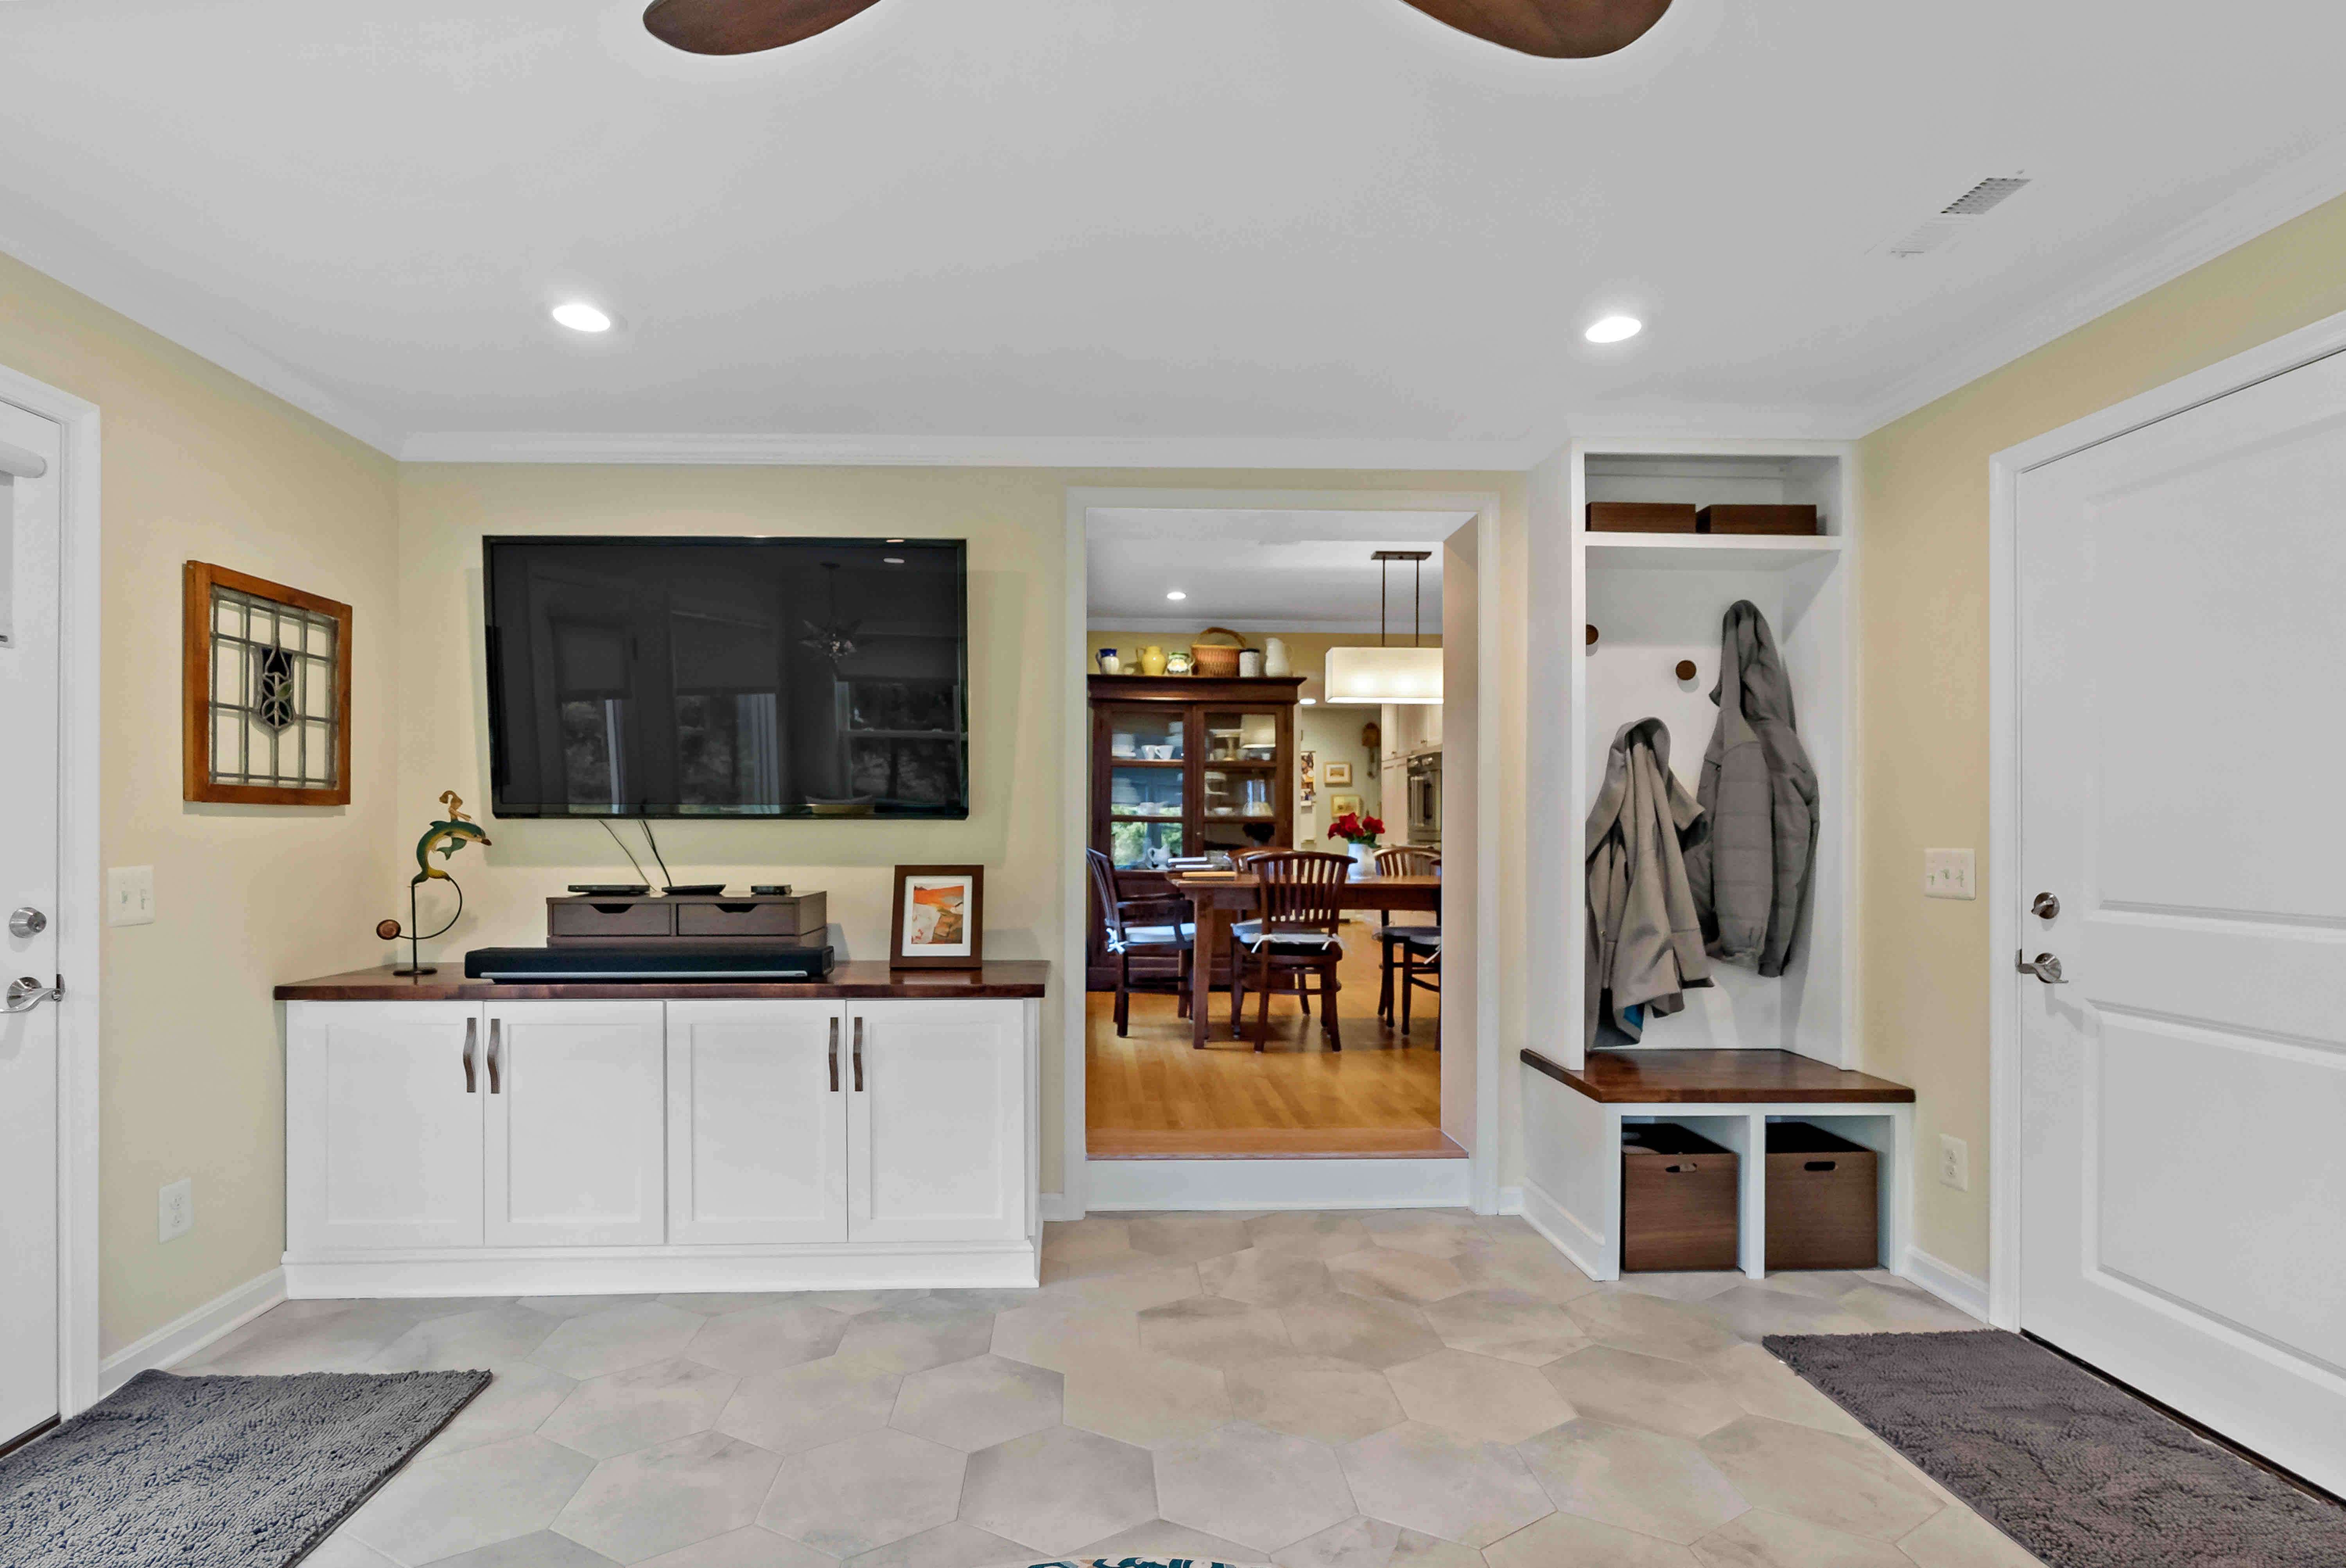 Mudroom area that connects to kitchen